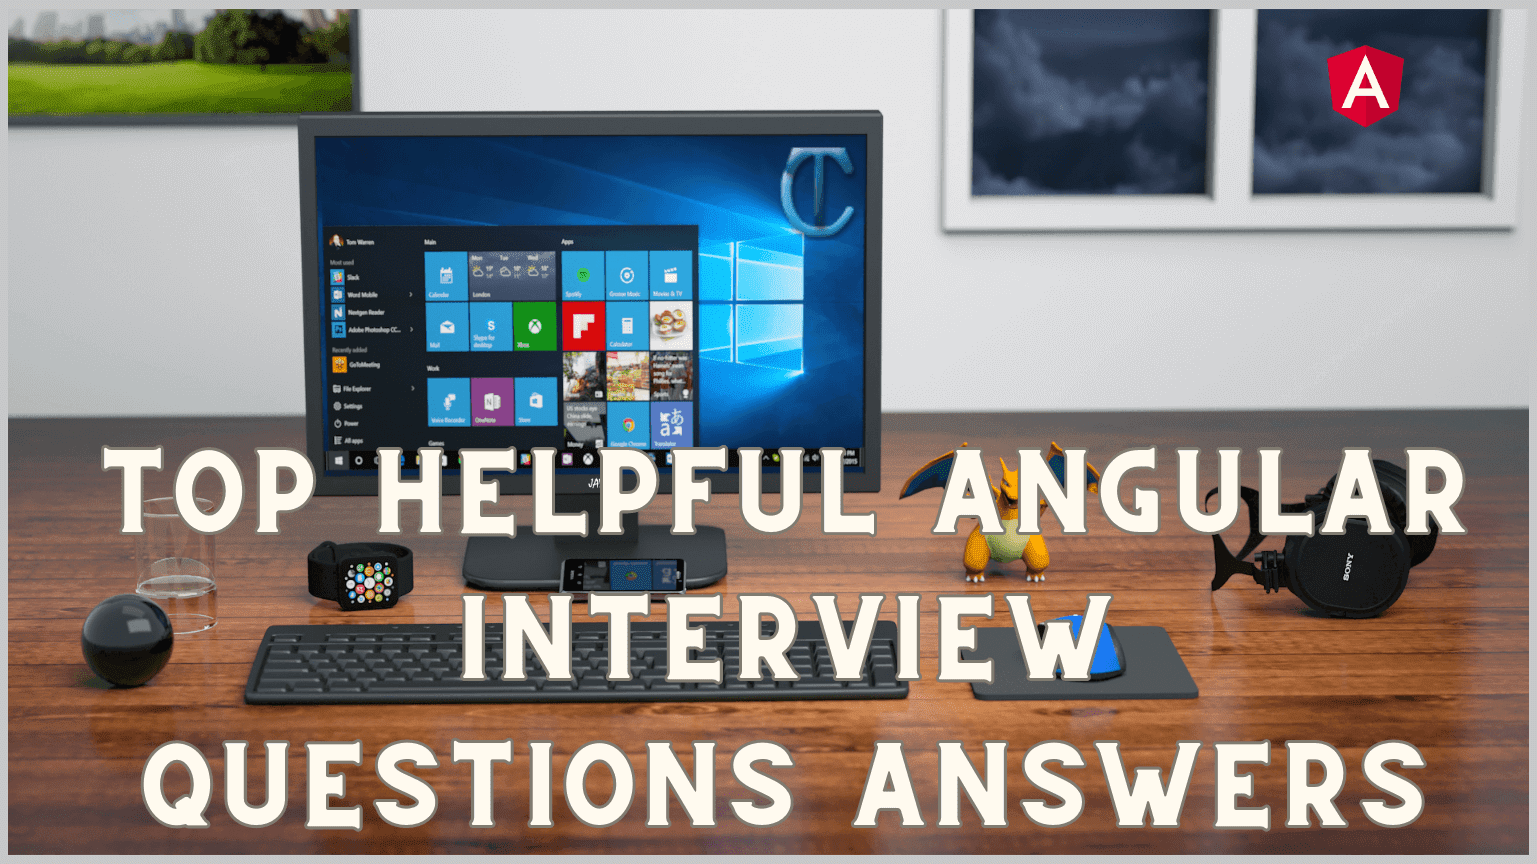 Top helpful Angular Interview Questions and Answers